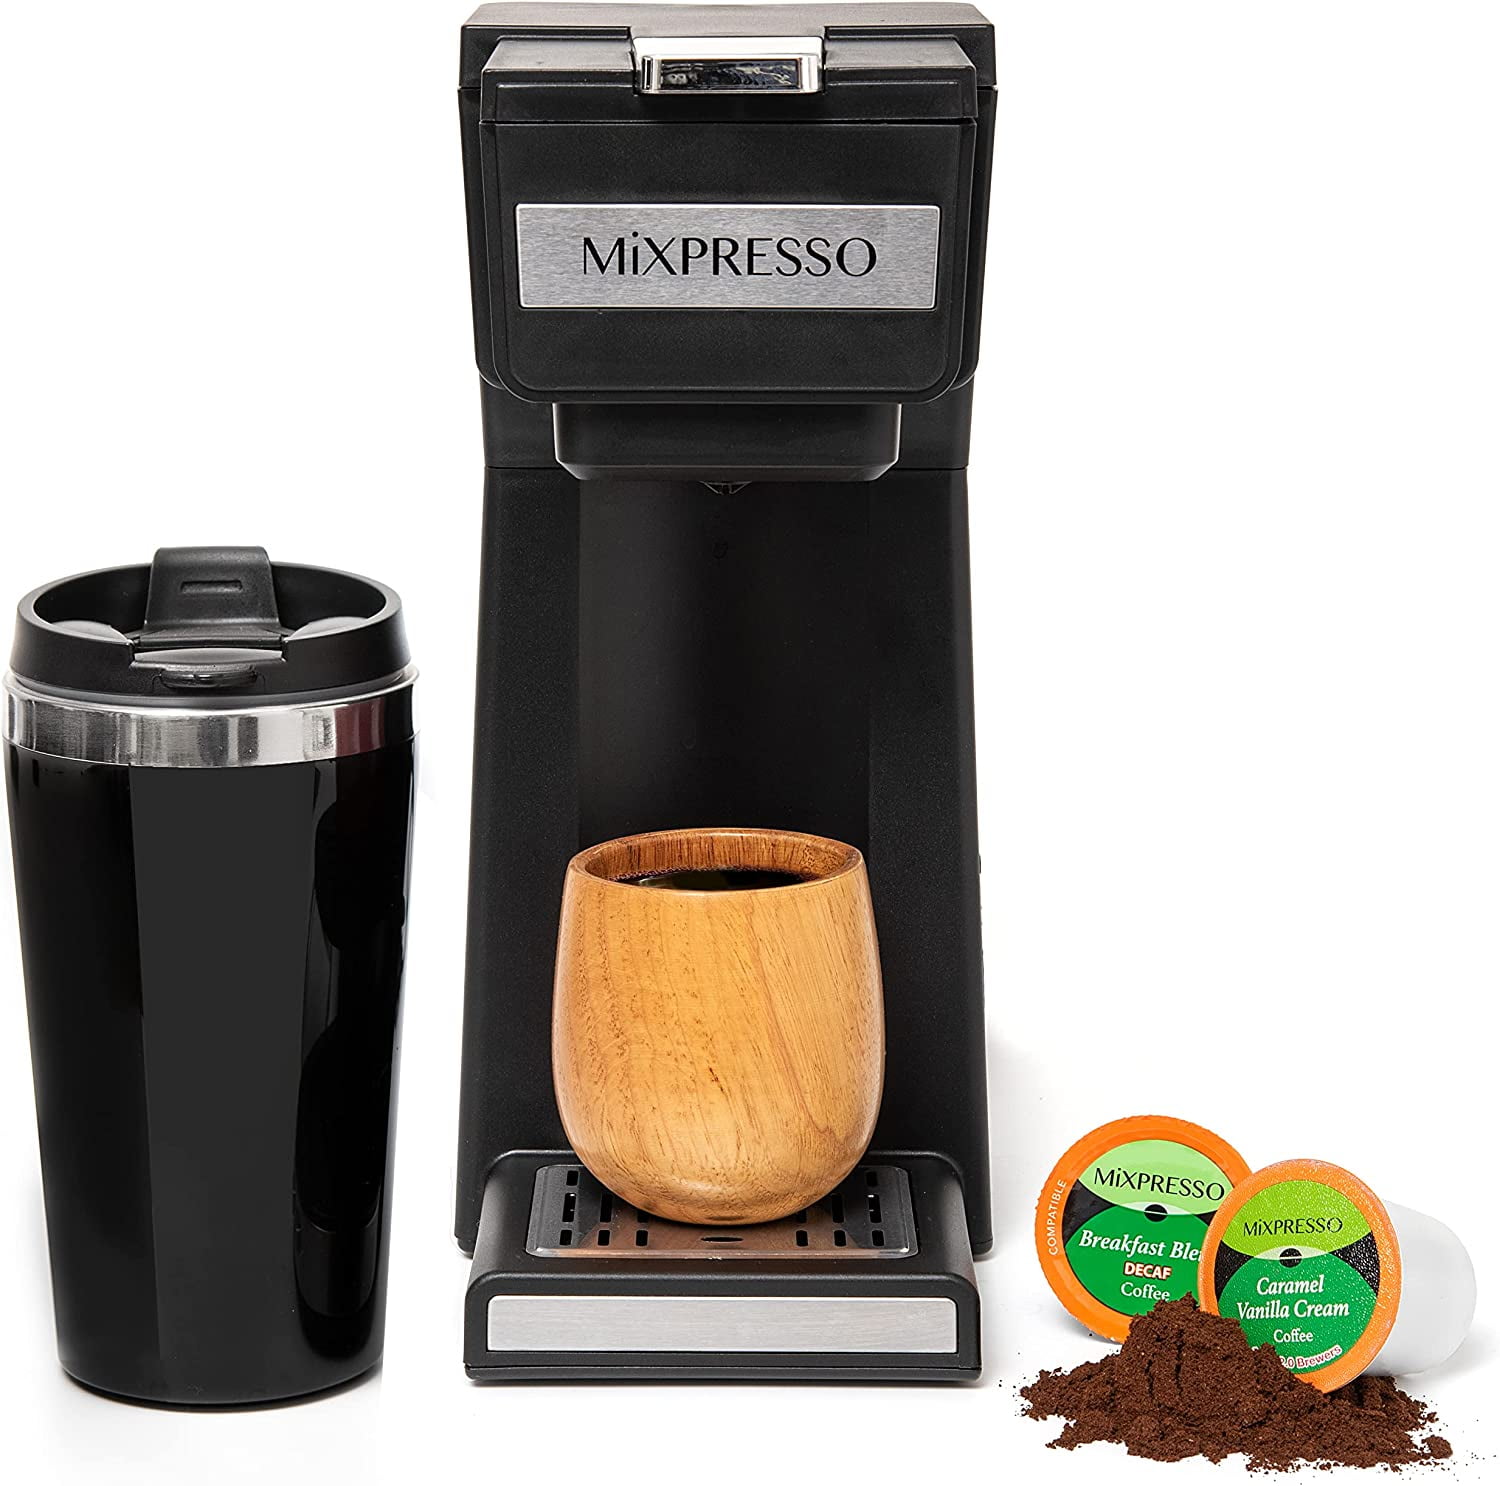  Mixpresso Single Serve Coffee Brewer K-Cup Pods Compatible &  Ground Coffee, 30 oz Compact Coffee Maker Single Serve With 5 Brew Sizes Up  To 14 Oz, Fits Travel Mug, Adjustable Drip